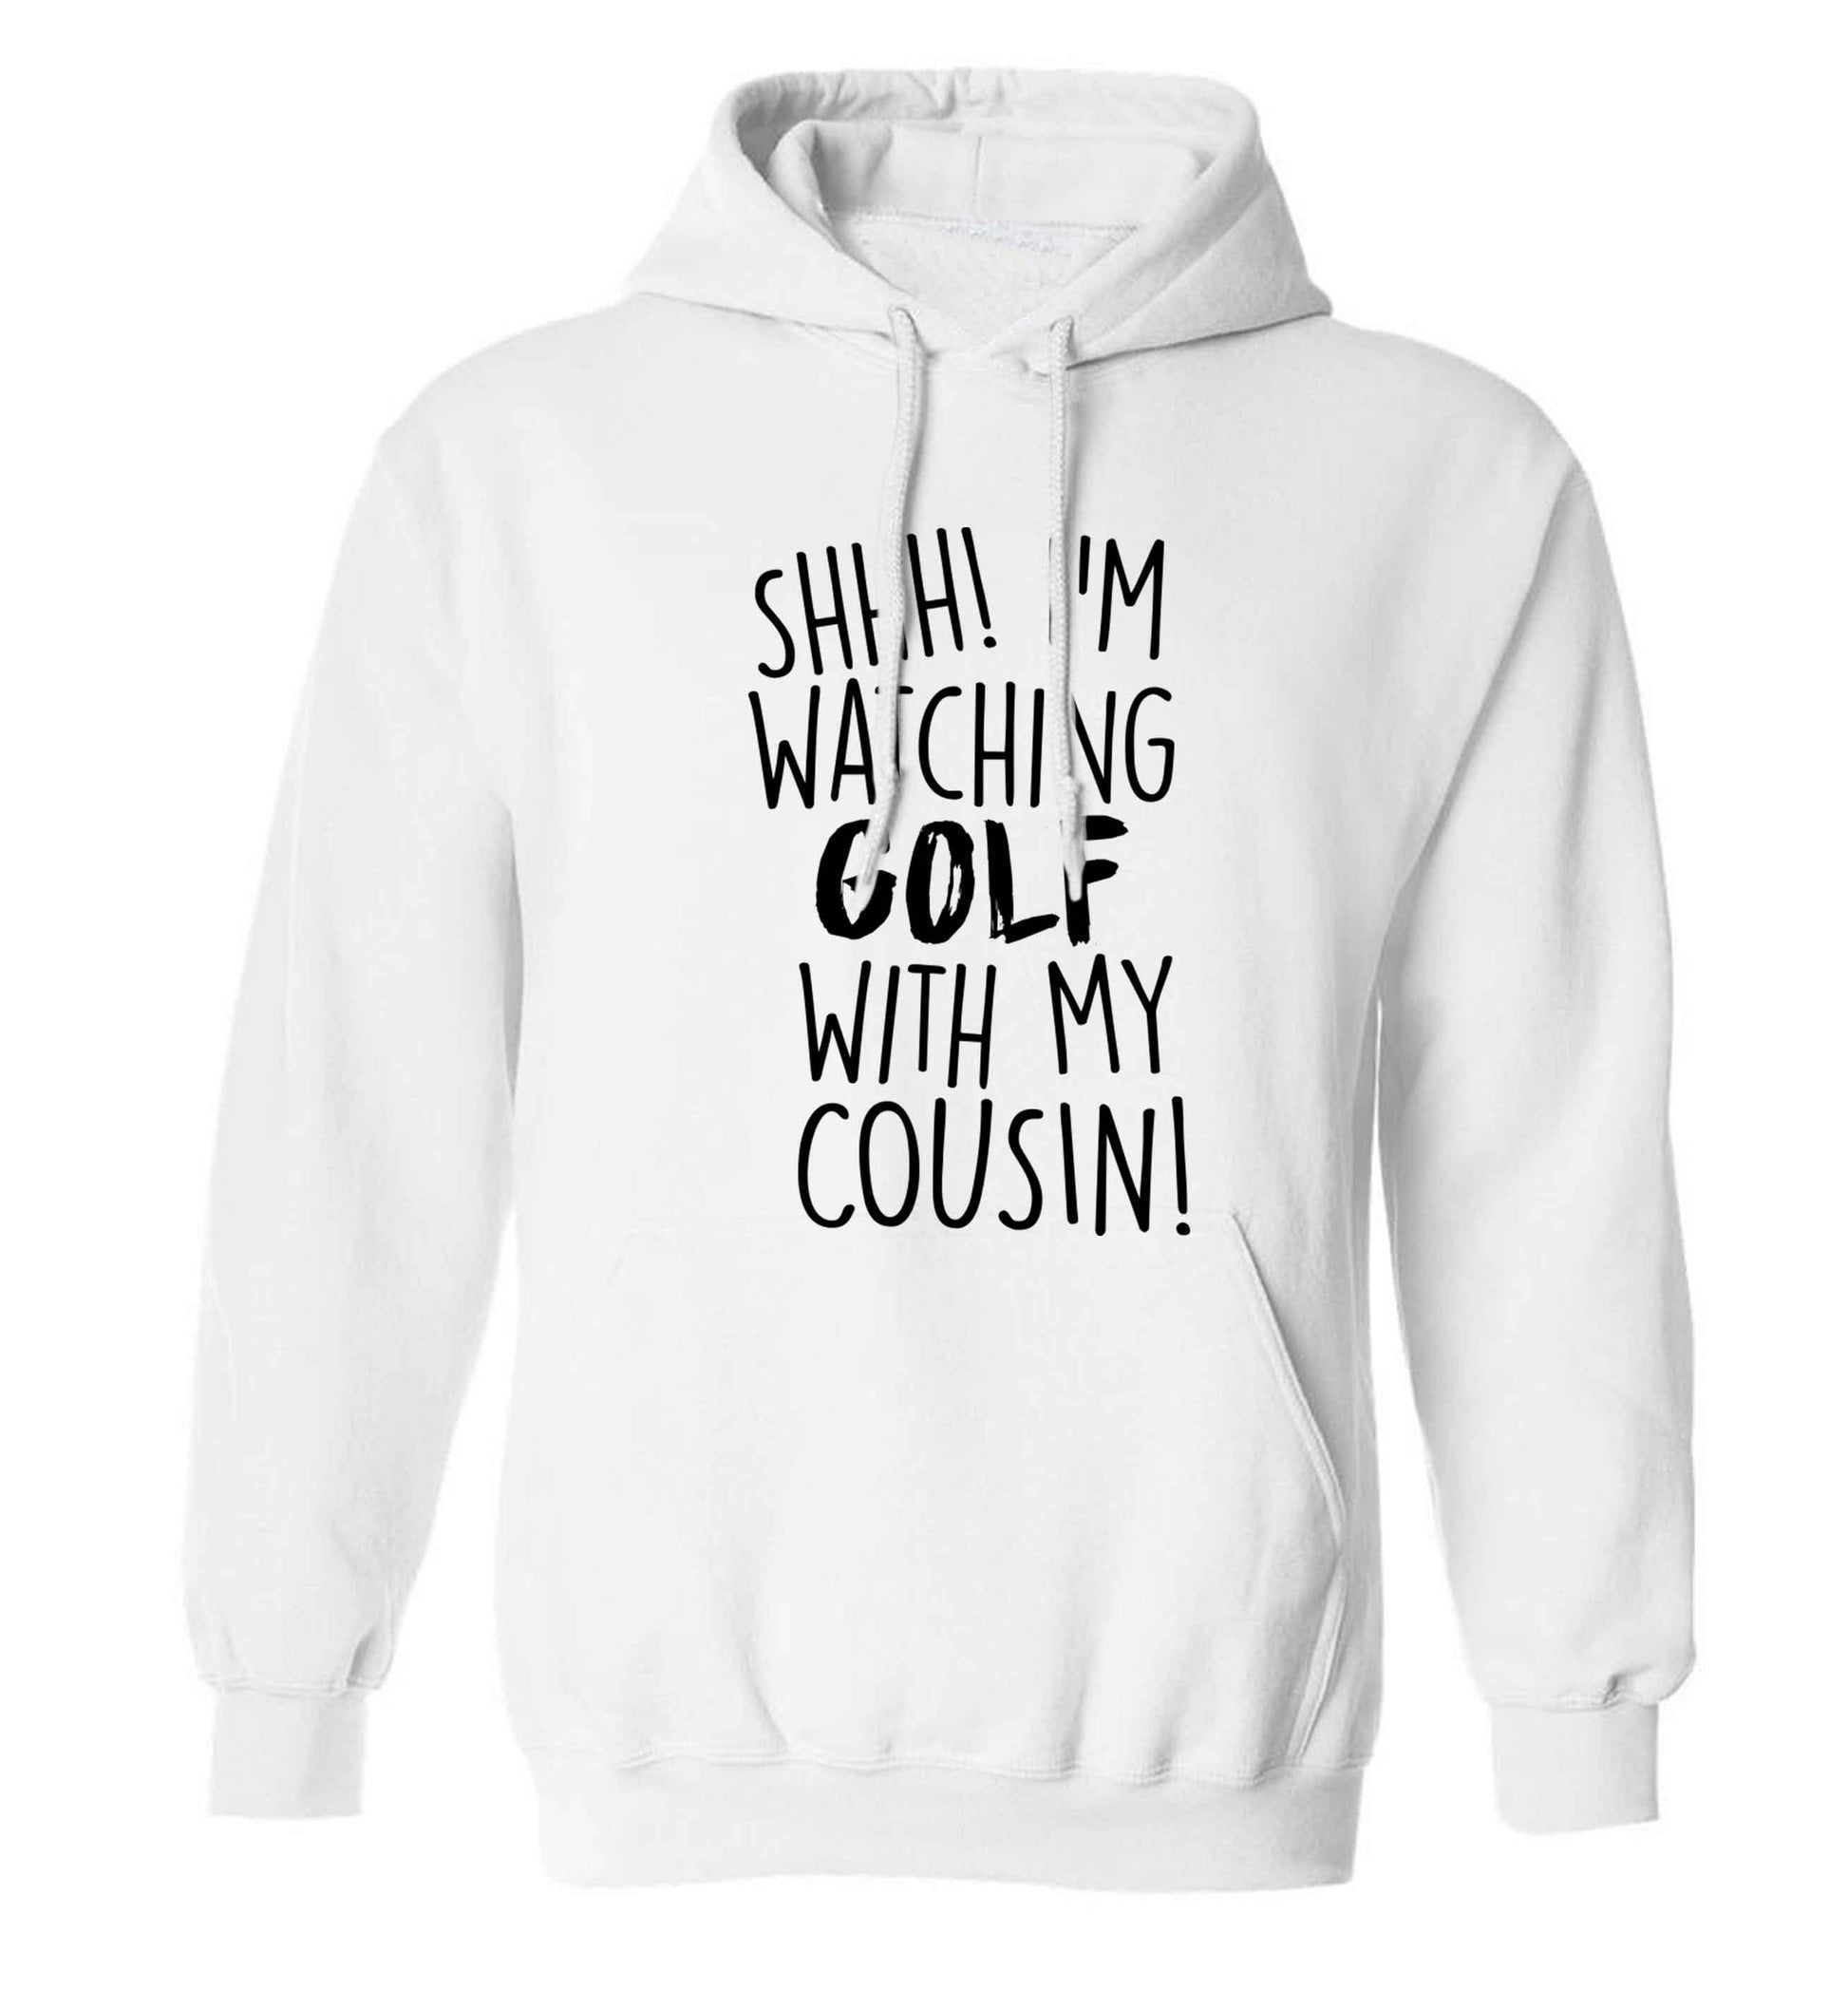 Shh I'm watching golf with my cousin adults unisex white hoodie 2XL